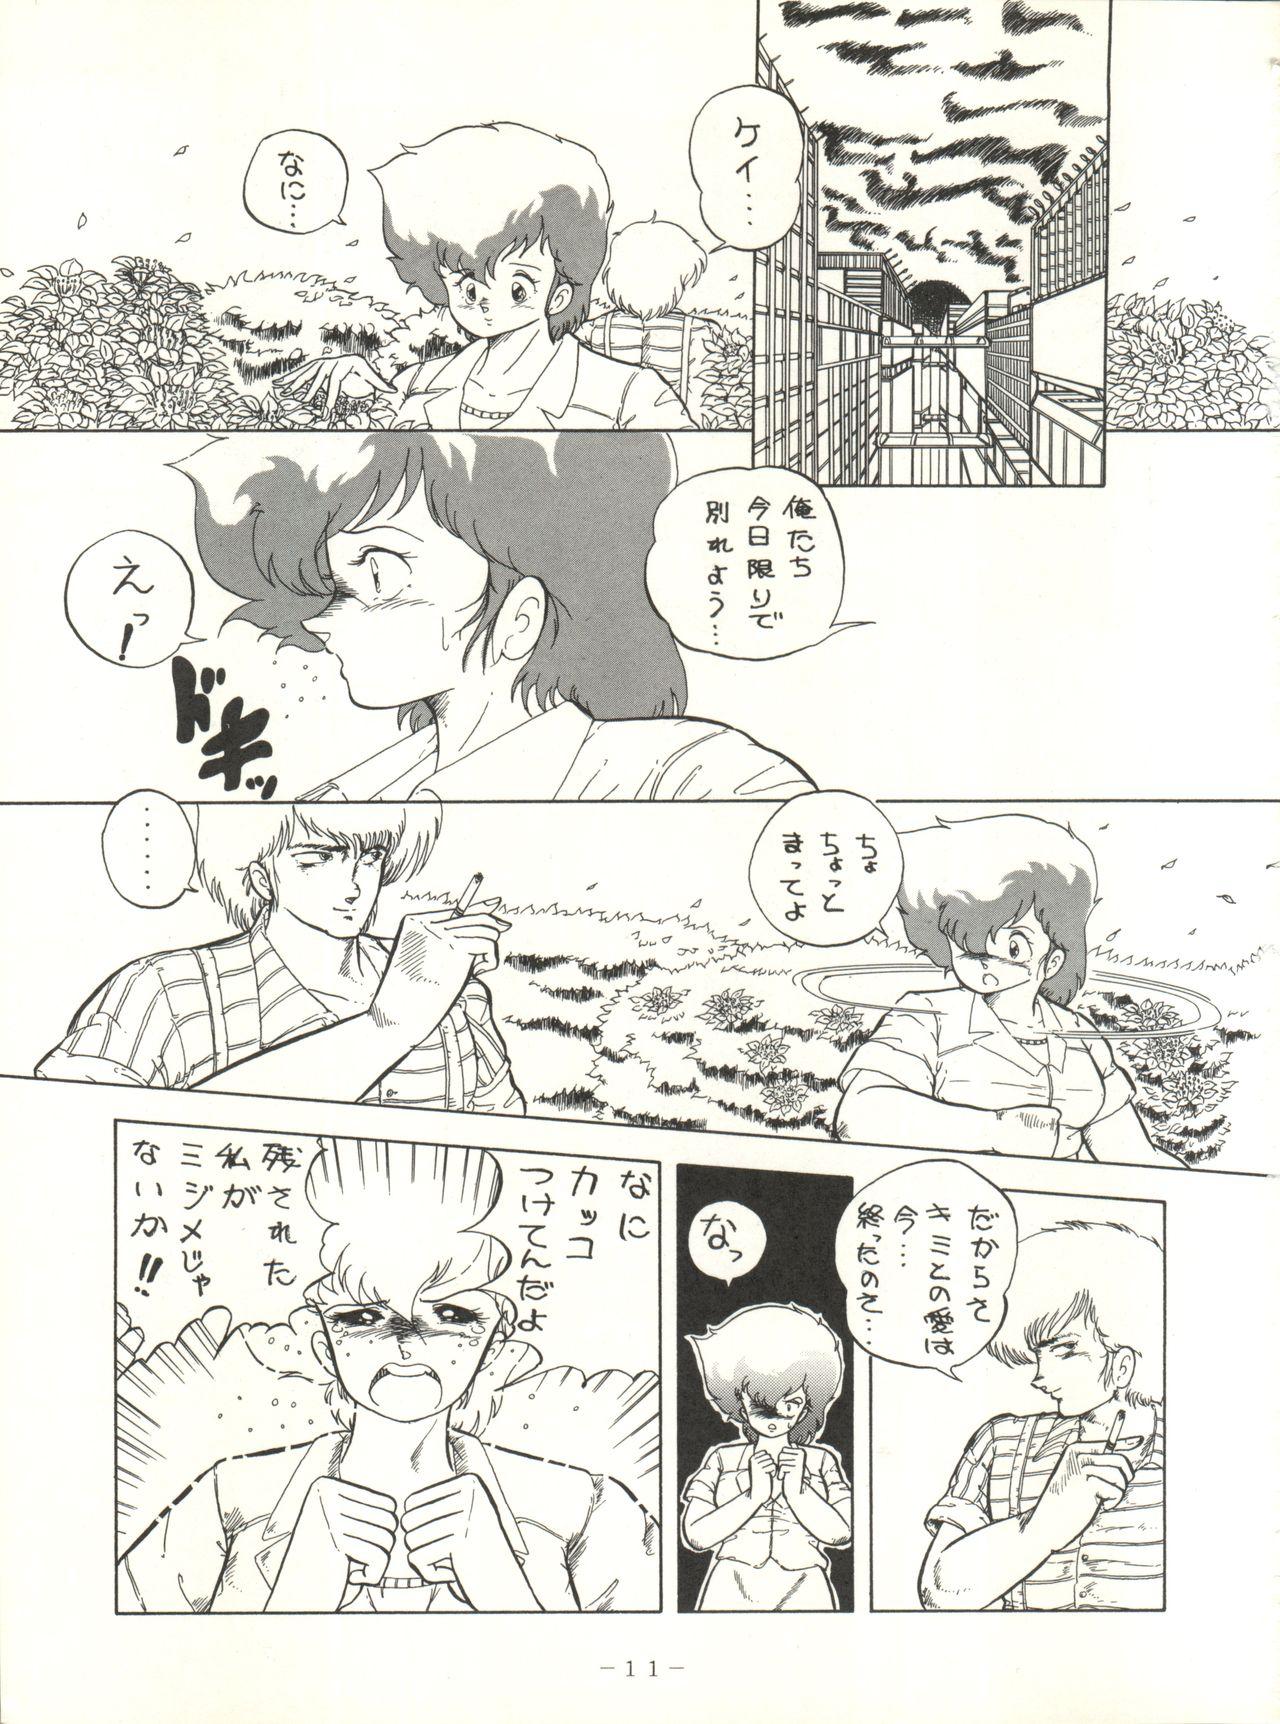 Stepbrother X DIGITAL ver.1.0 - Dirty pair Family - Page 11